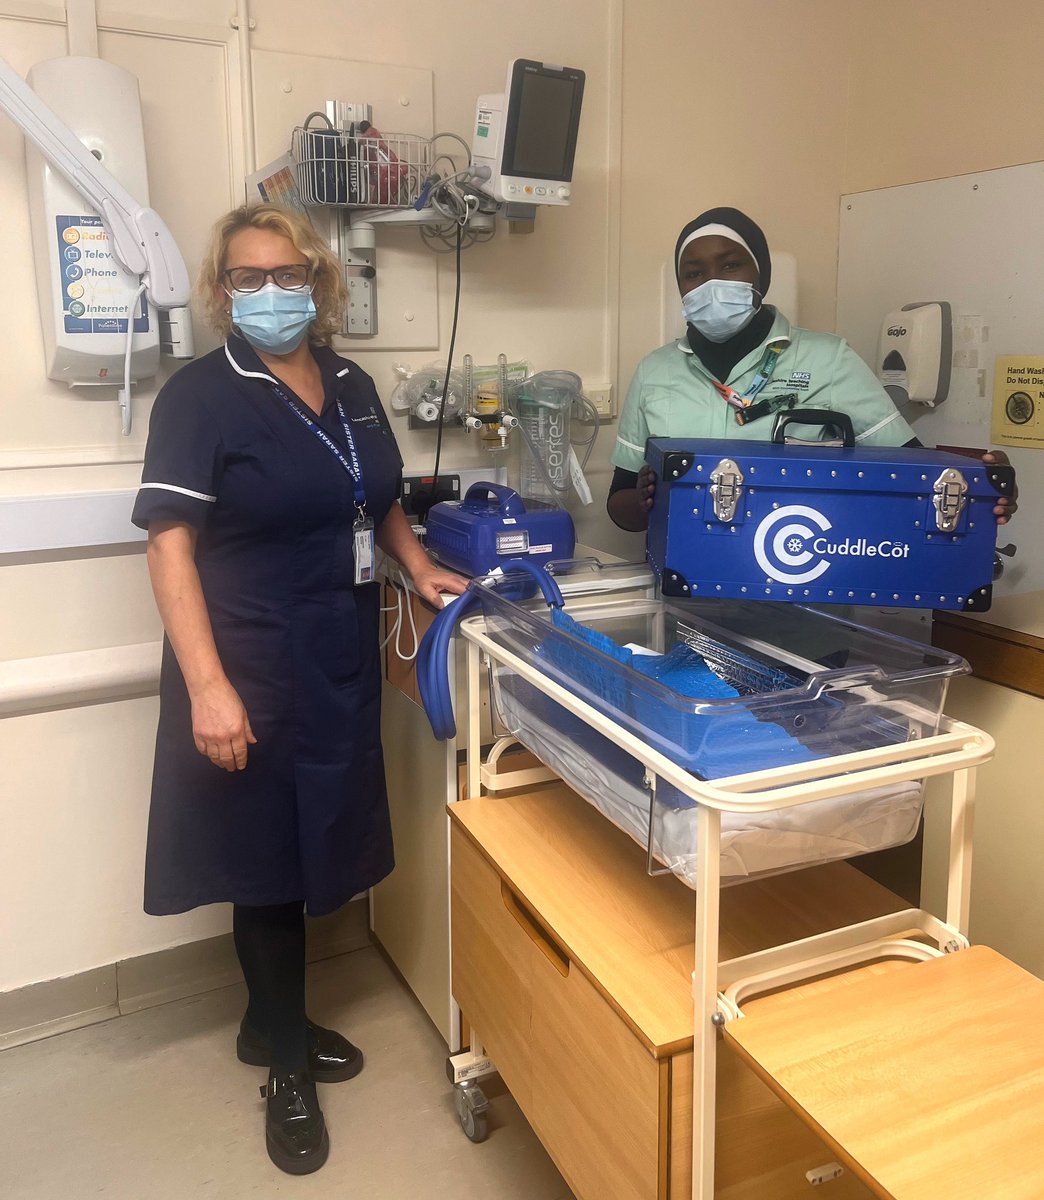 Parents suffering baby loss will now have time to make memories before saying goodbye, thanks to the gift of a CuddleCot for our Children’s Ward at @lancshospitals 🙏🧡 🕊️ 

The CuddleCot has been jointly donated by two children’s charities, Remember Rufus and Freddie’s Wish.